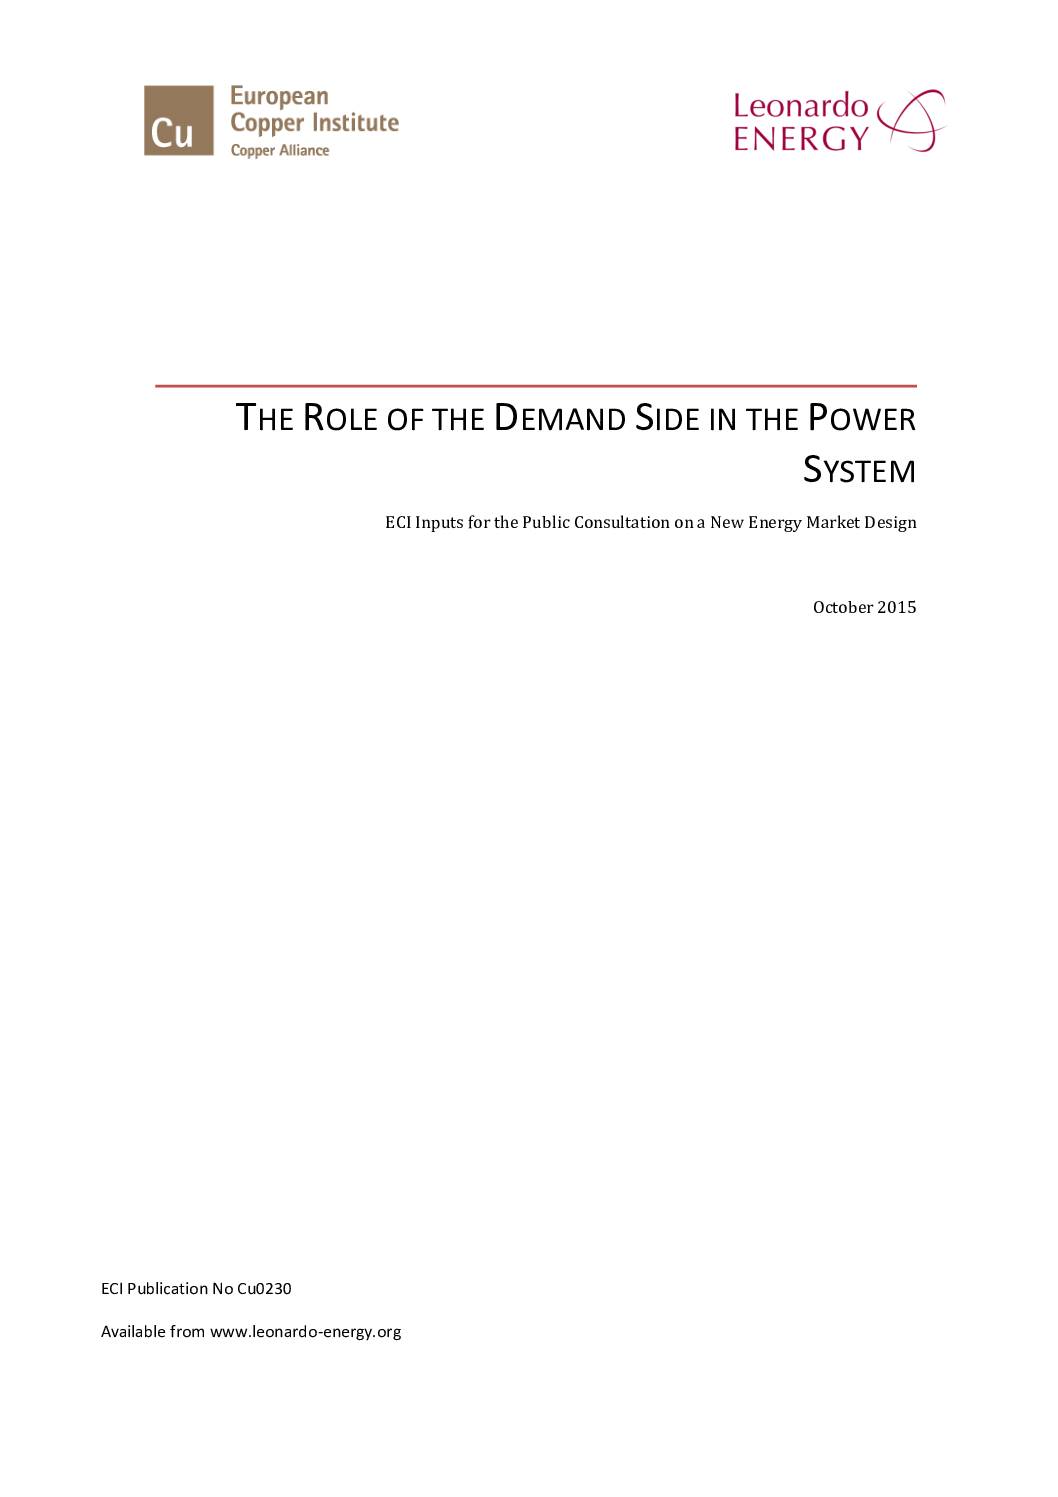 The Role of the Demand Side in the Power System